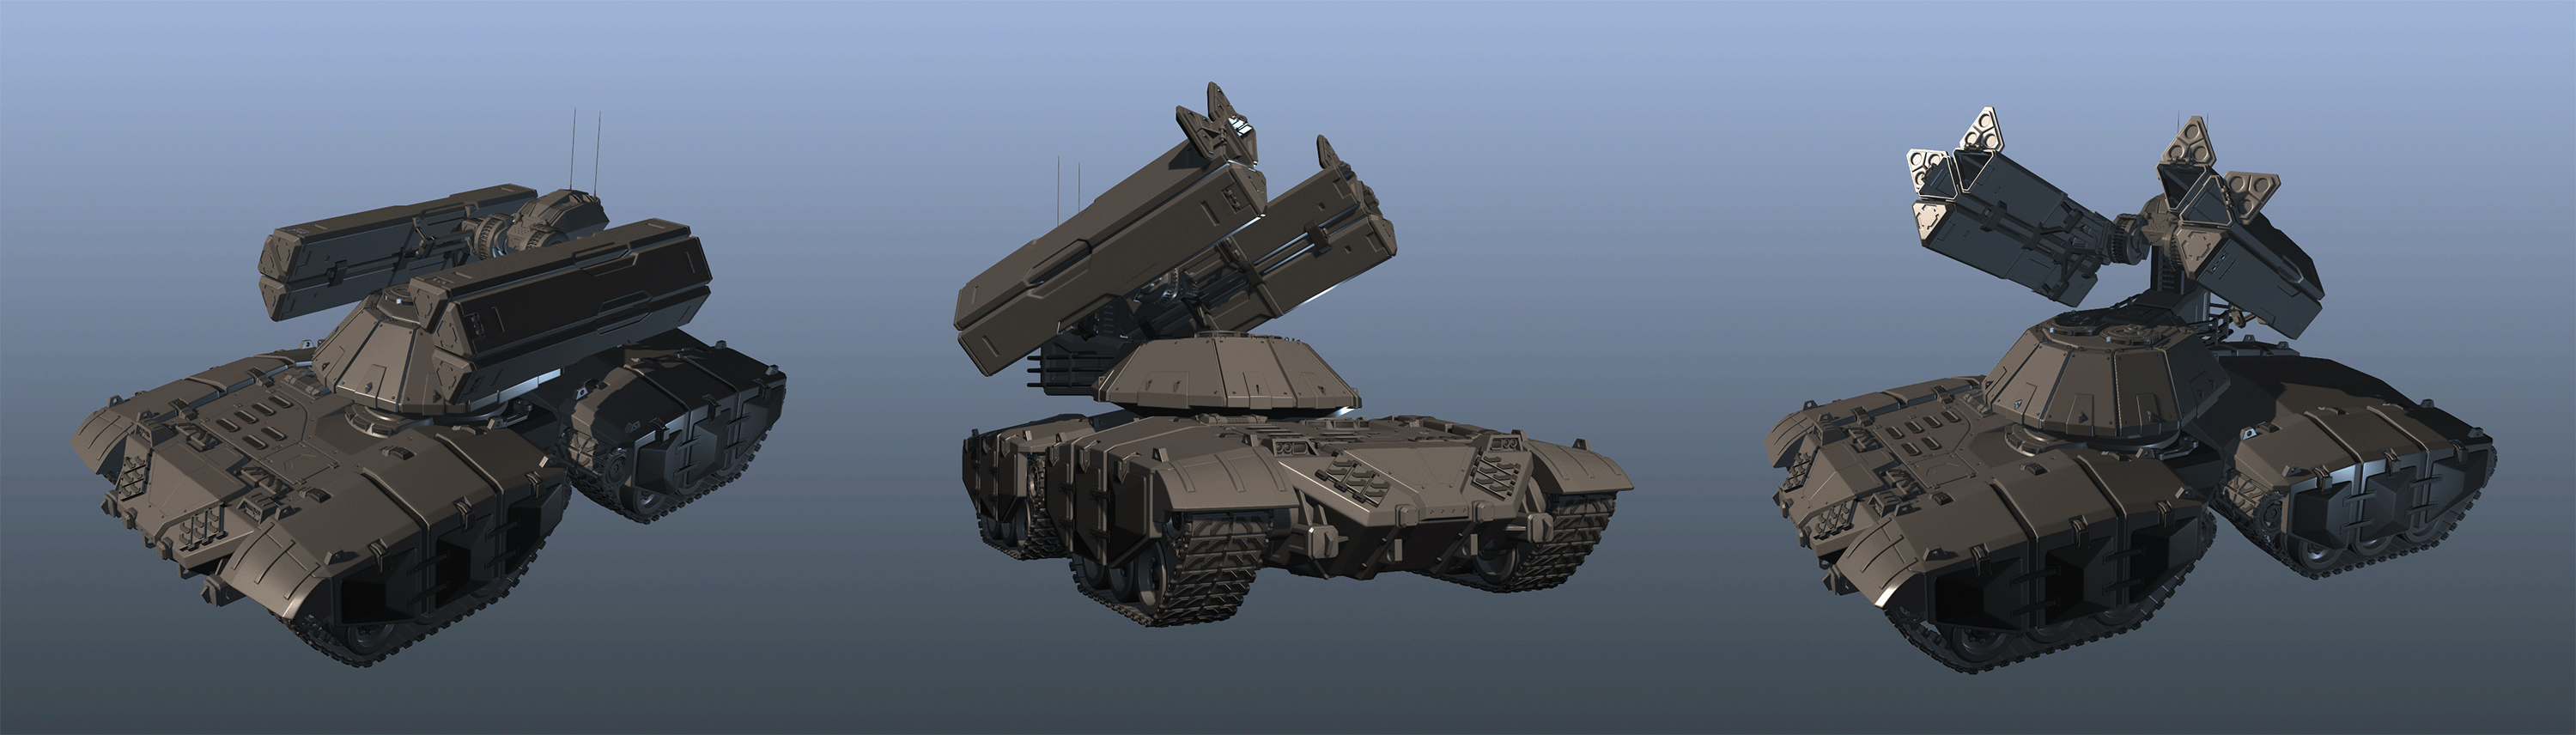 tank_perspective.png